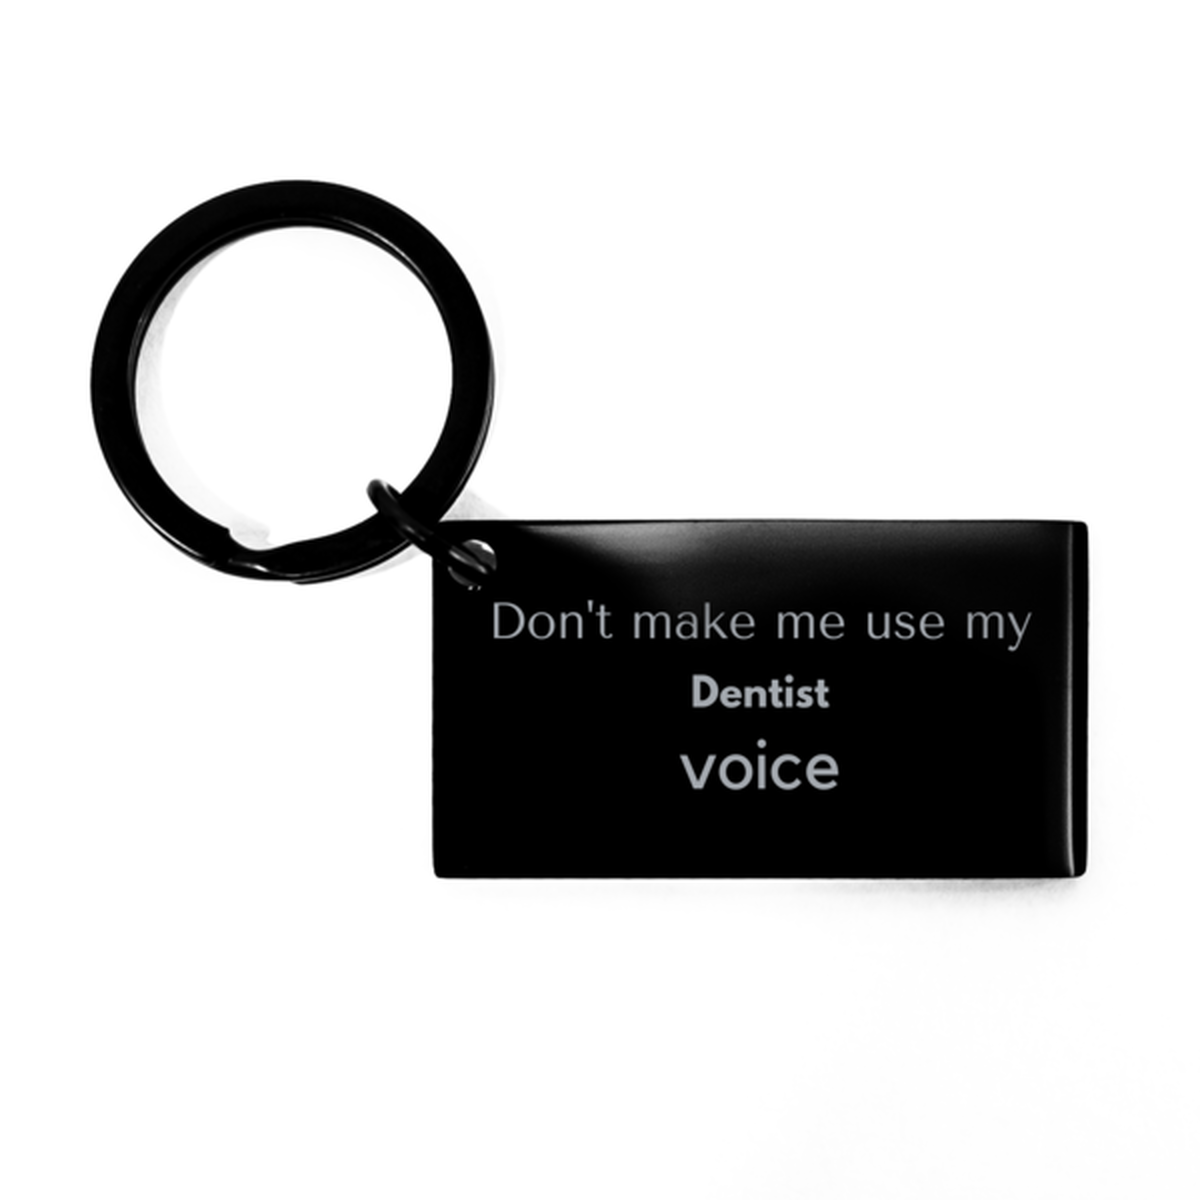 Don't make me use my Dentist voice, Sarcasm Dentist Gifts, Christmas Dentist Keychain Birthday Unique Gifts For Dentist Coworkers, Men, Women, Colleague, Friends